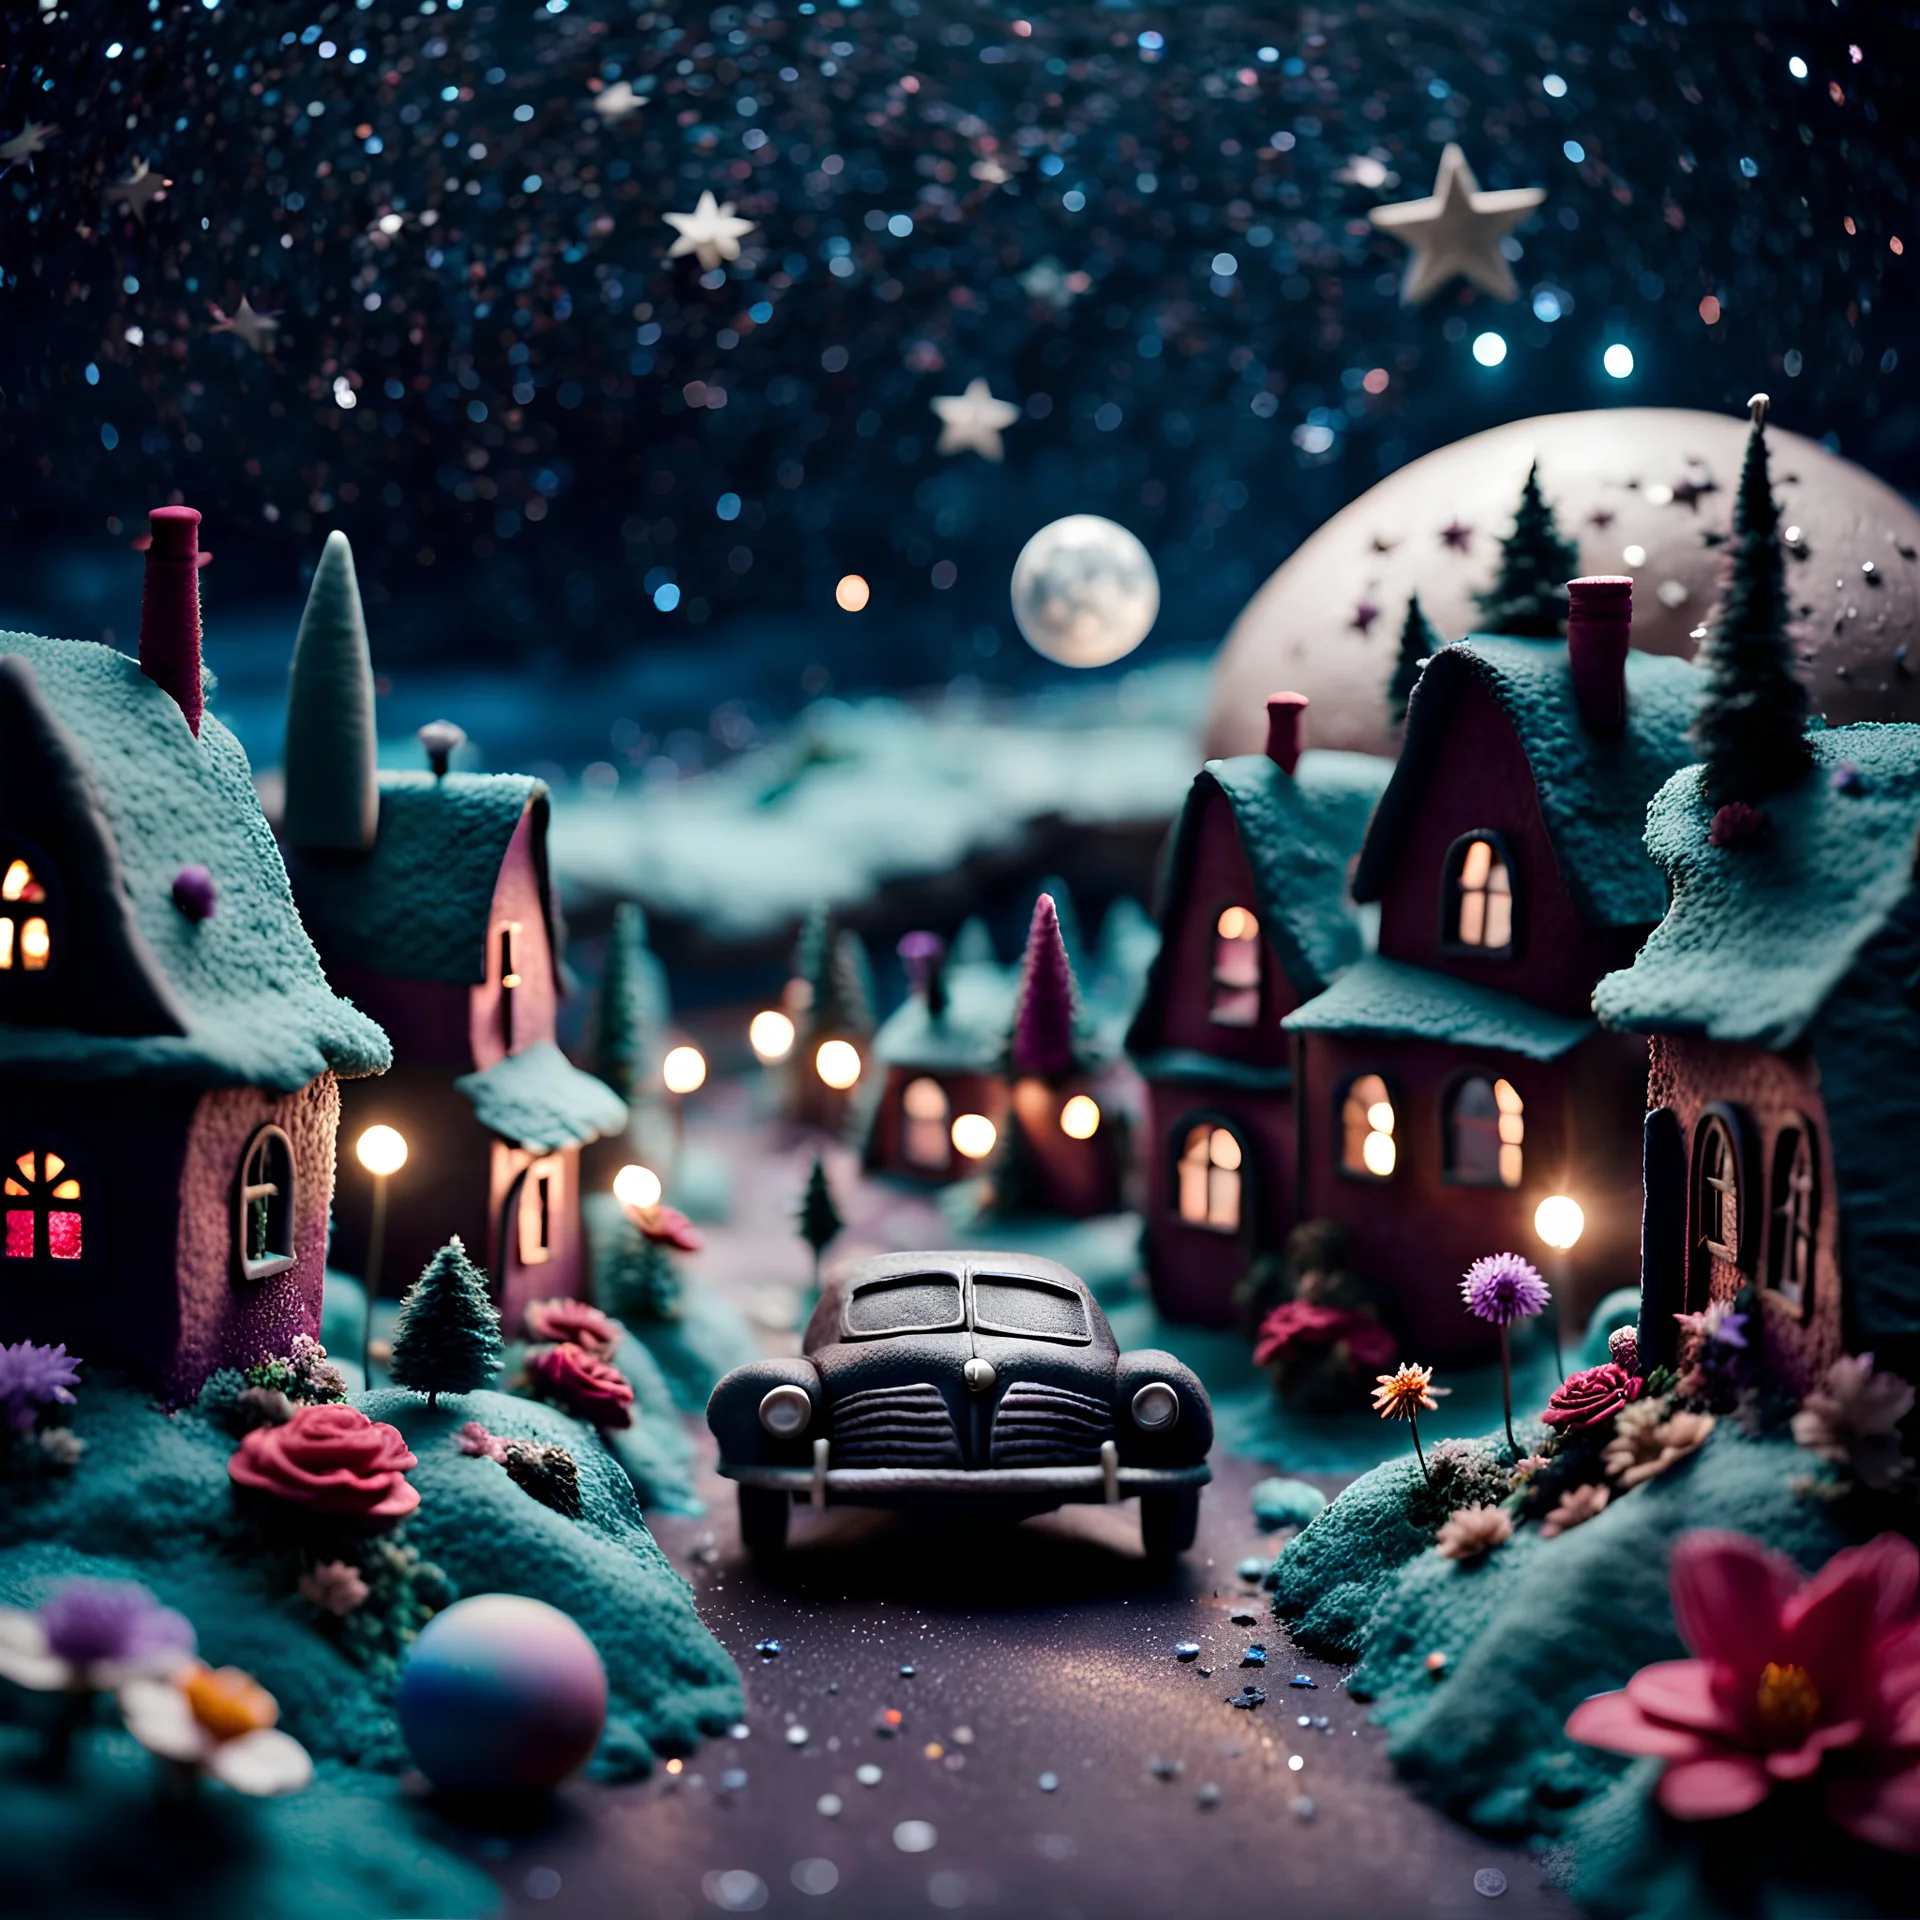 Detailed people, street made of modeling clay and felt, cars, village, stars, galaxy and fog, planets, moon, volumetric light flowers, naïve, strong texture, extreme detail, Yves Tanguy, decal, rich moody colors, sparkles, Harry Potter, bokeh, odd, shot on Ilford